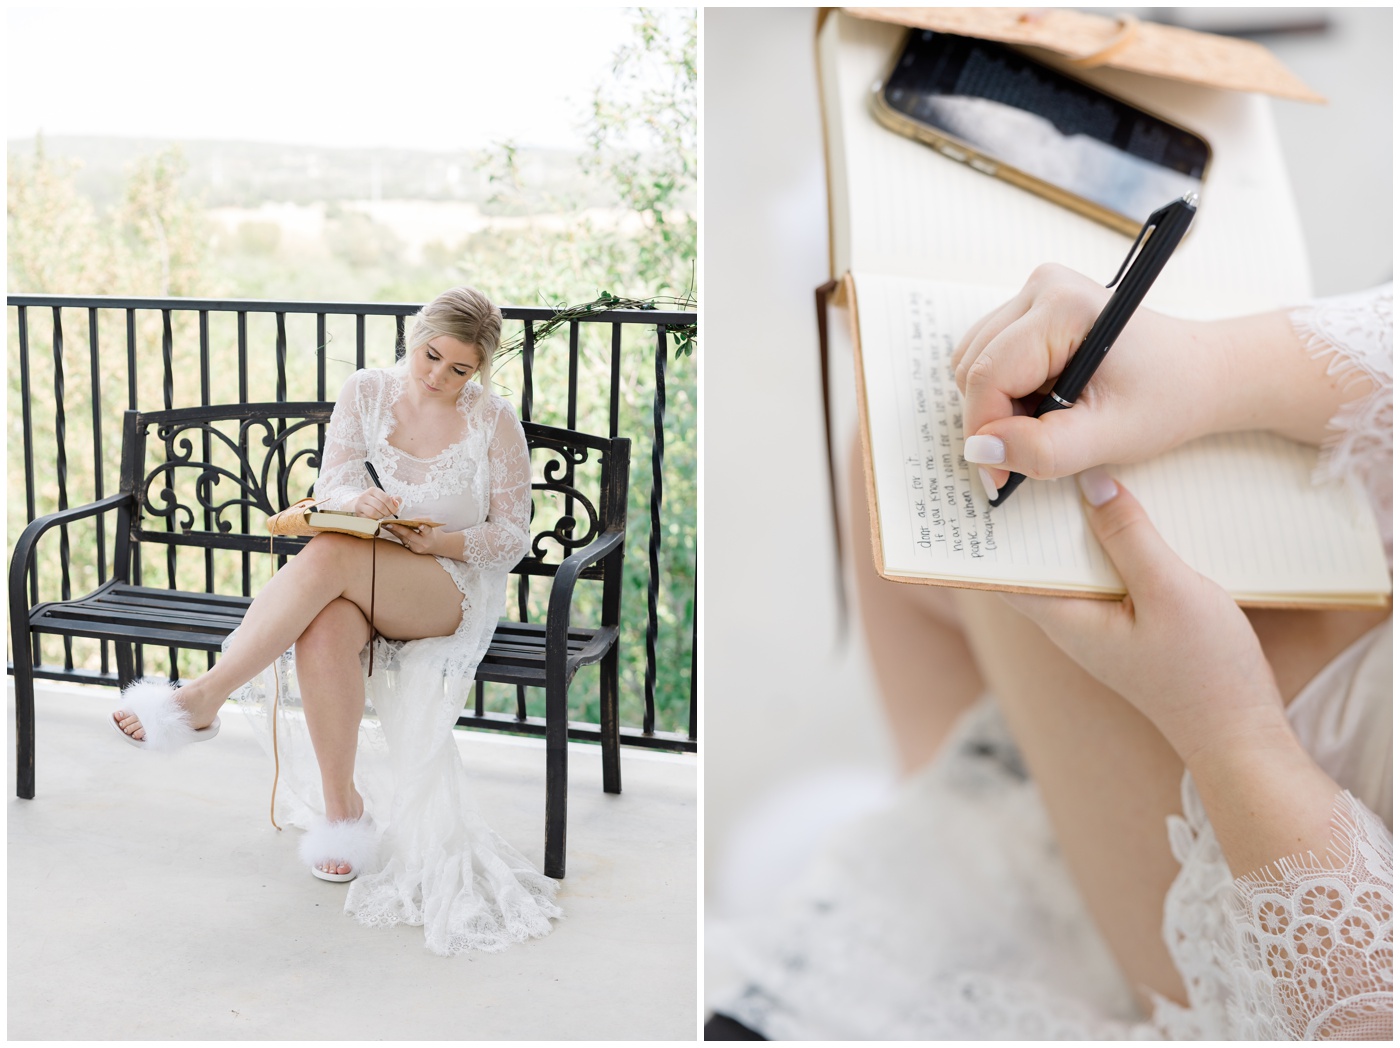 A bride journals on the morning of her wedding day